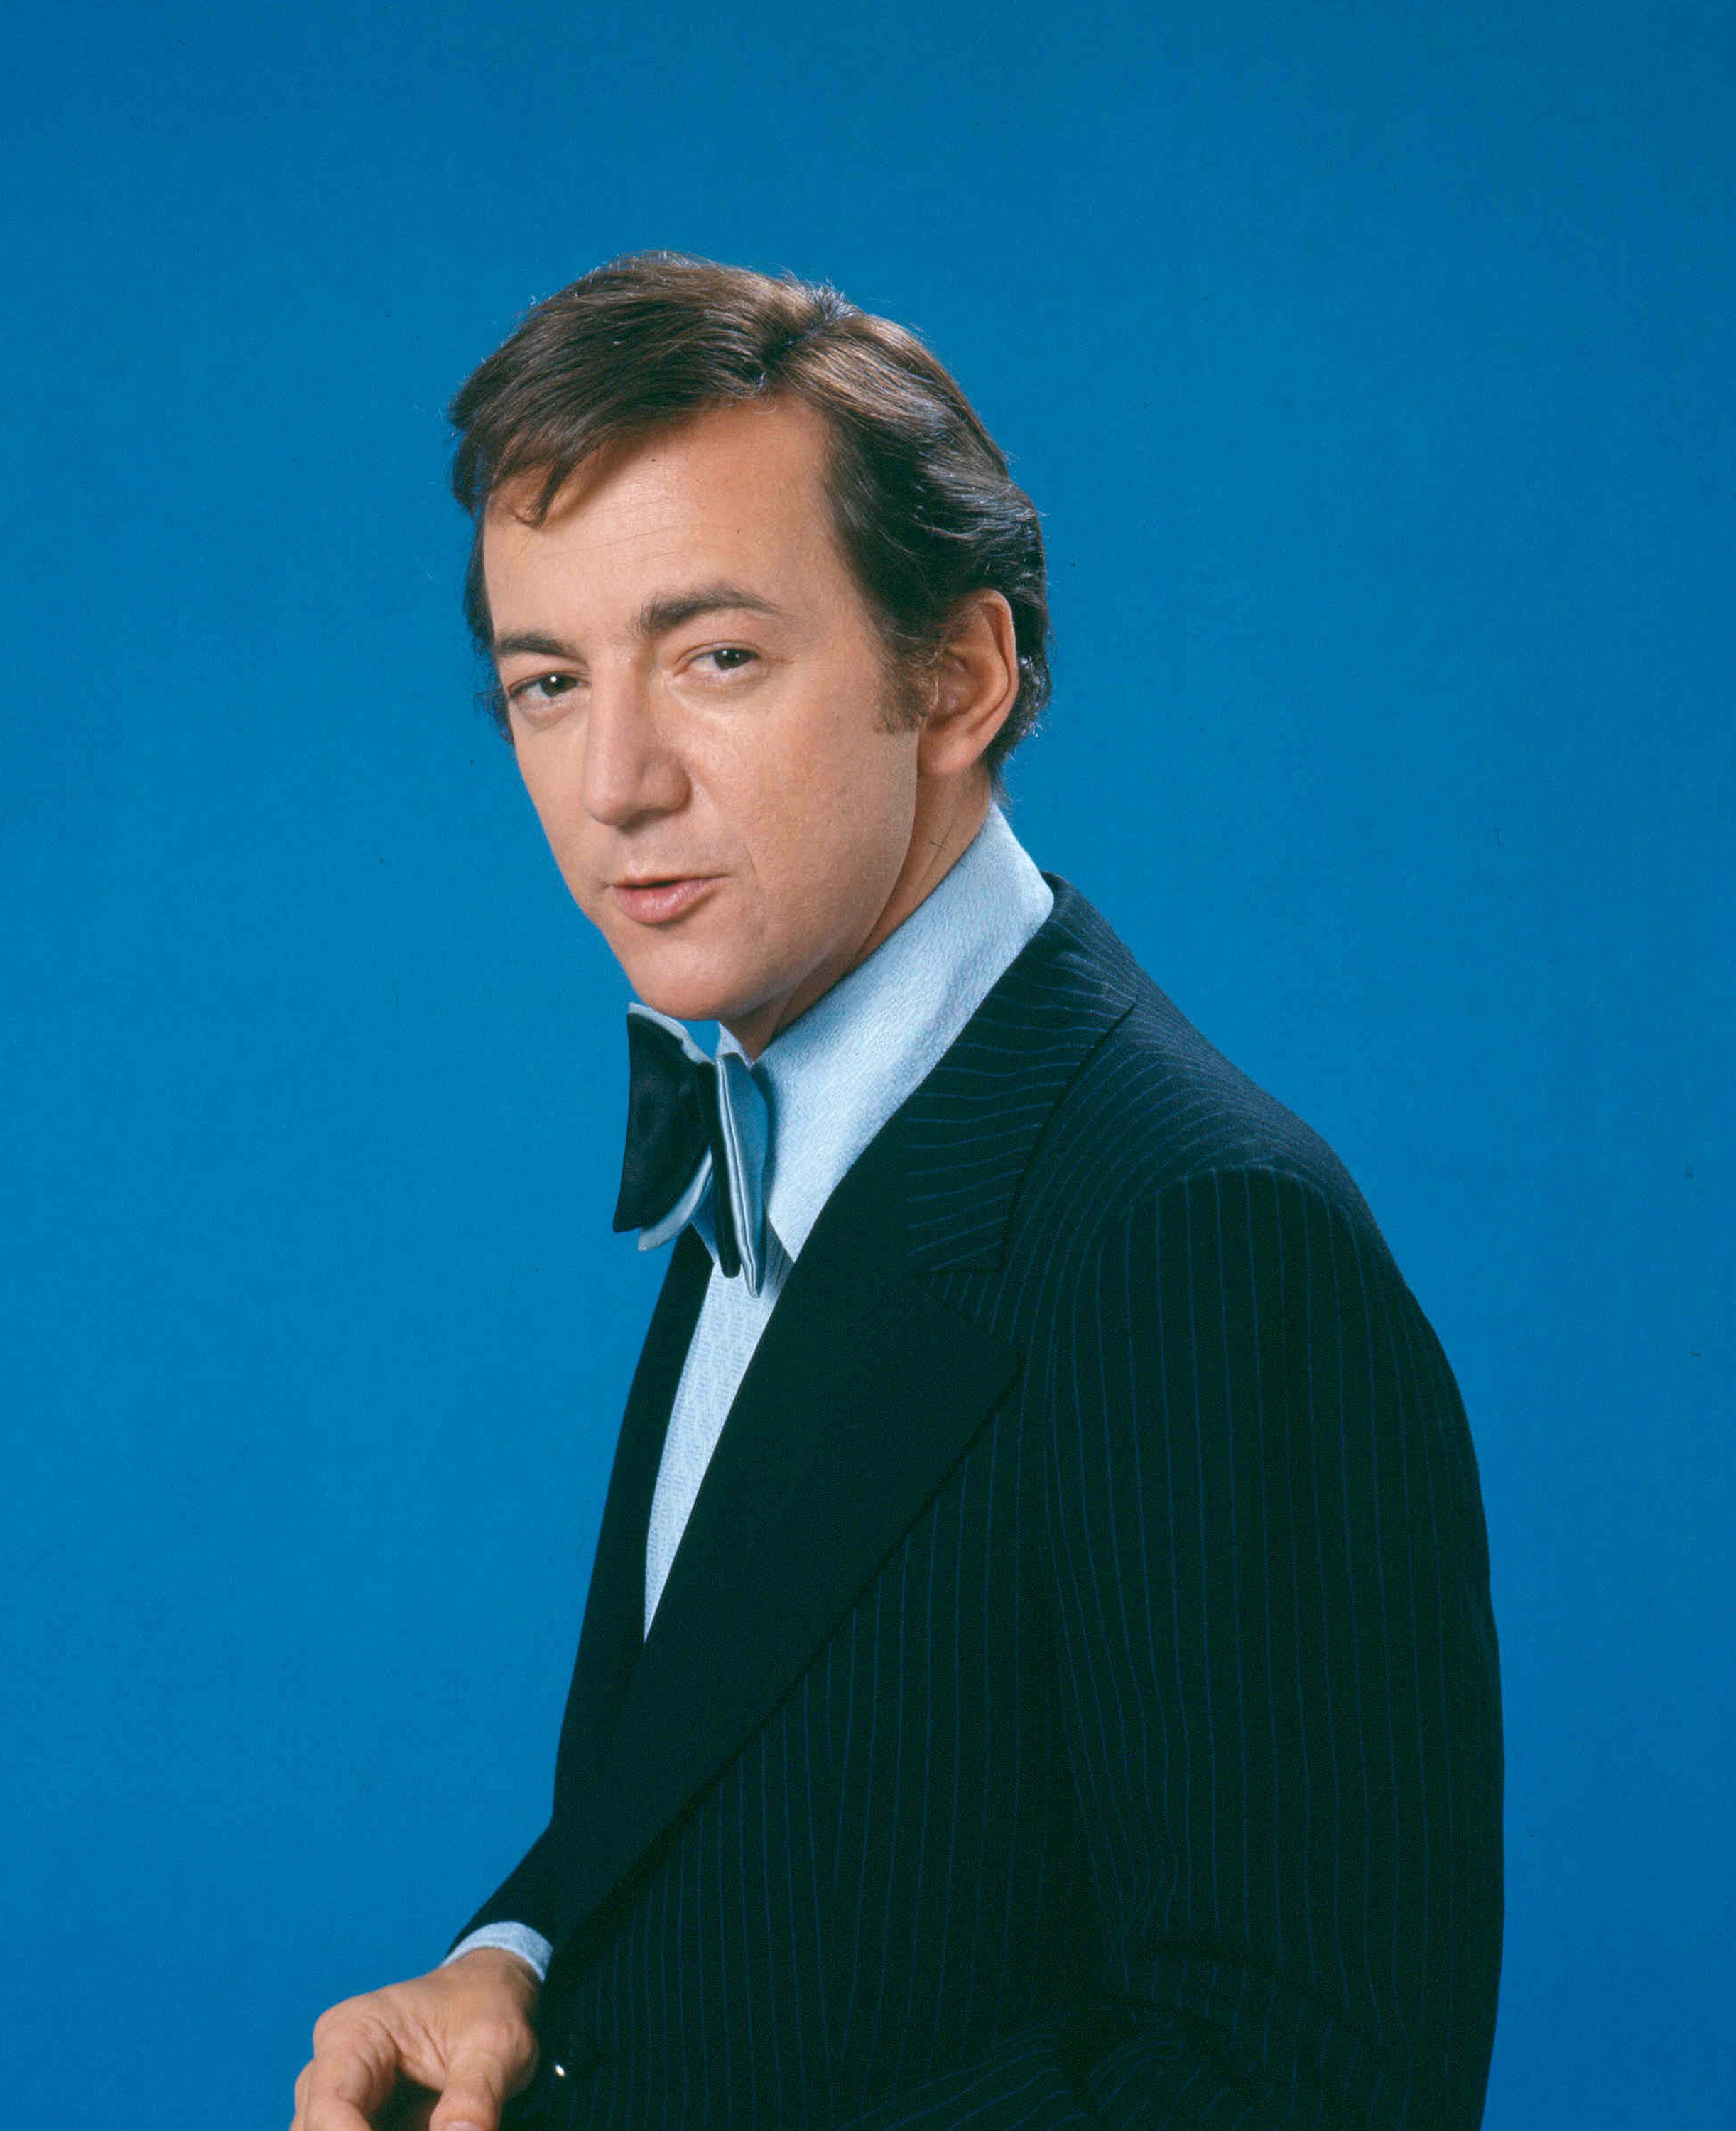 US singer and actor, wearing a dark blue pin-striped jacket, a light blue shirt and dark blue bowtie in a studio portrait, against a blue background, circa 1965 | Source:Getty Images